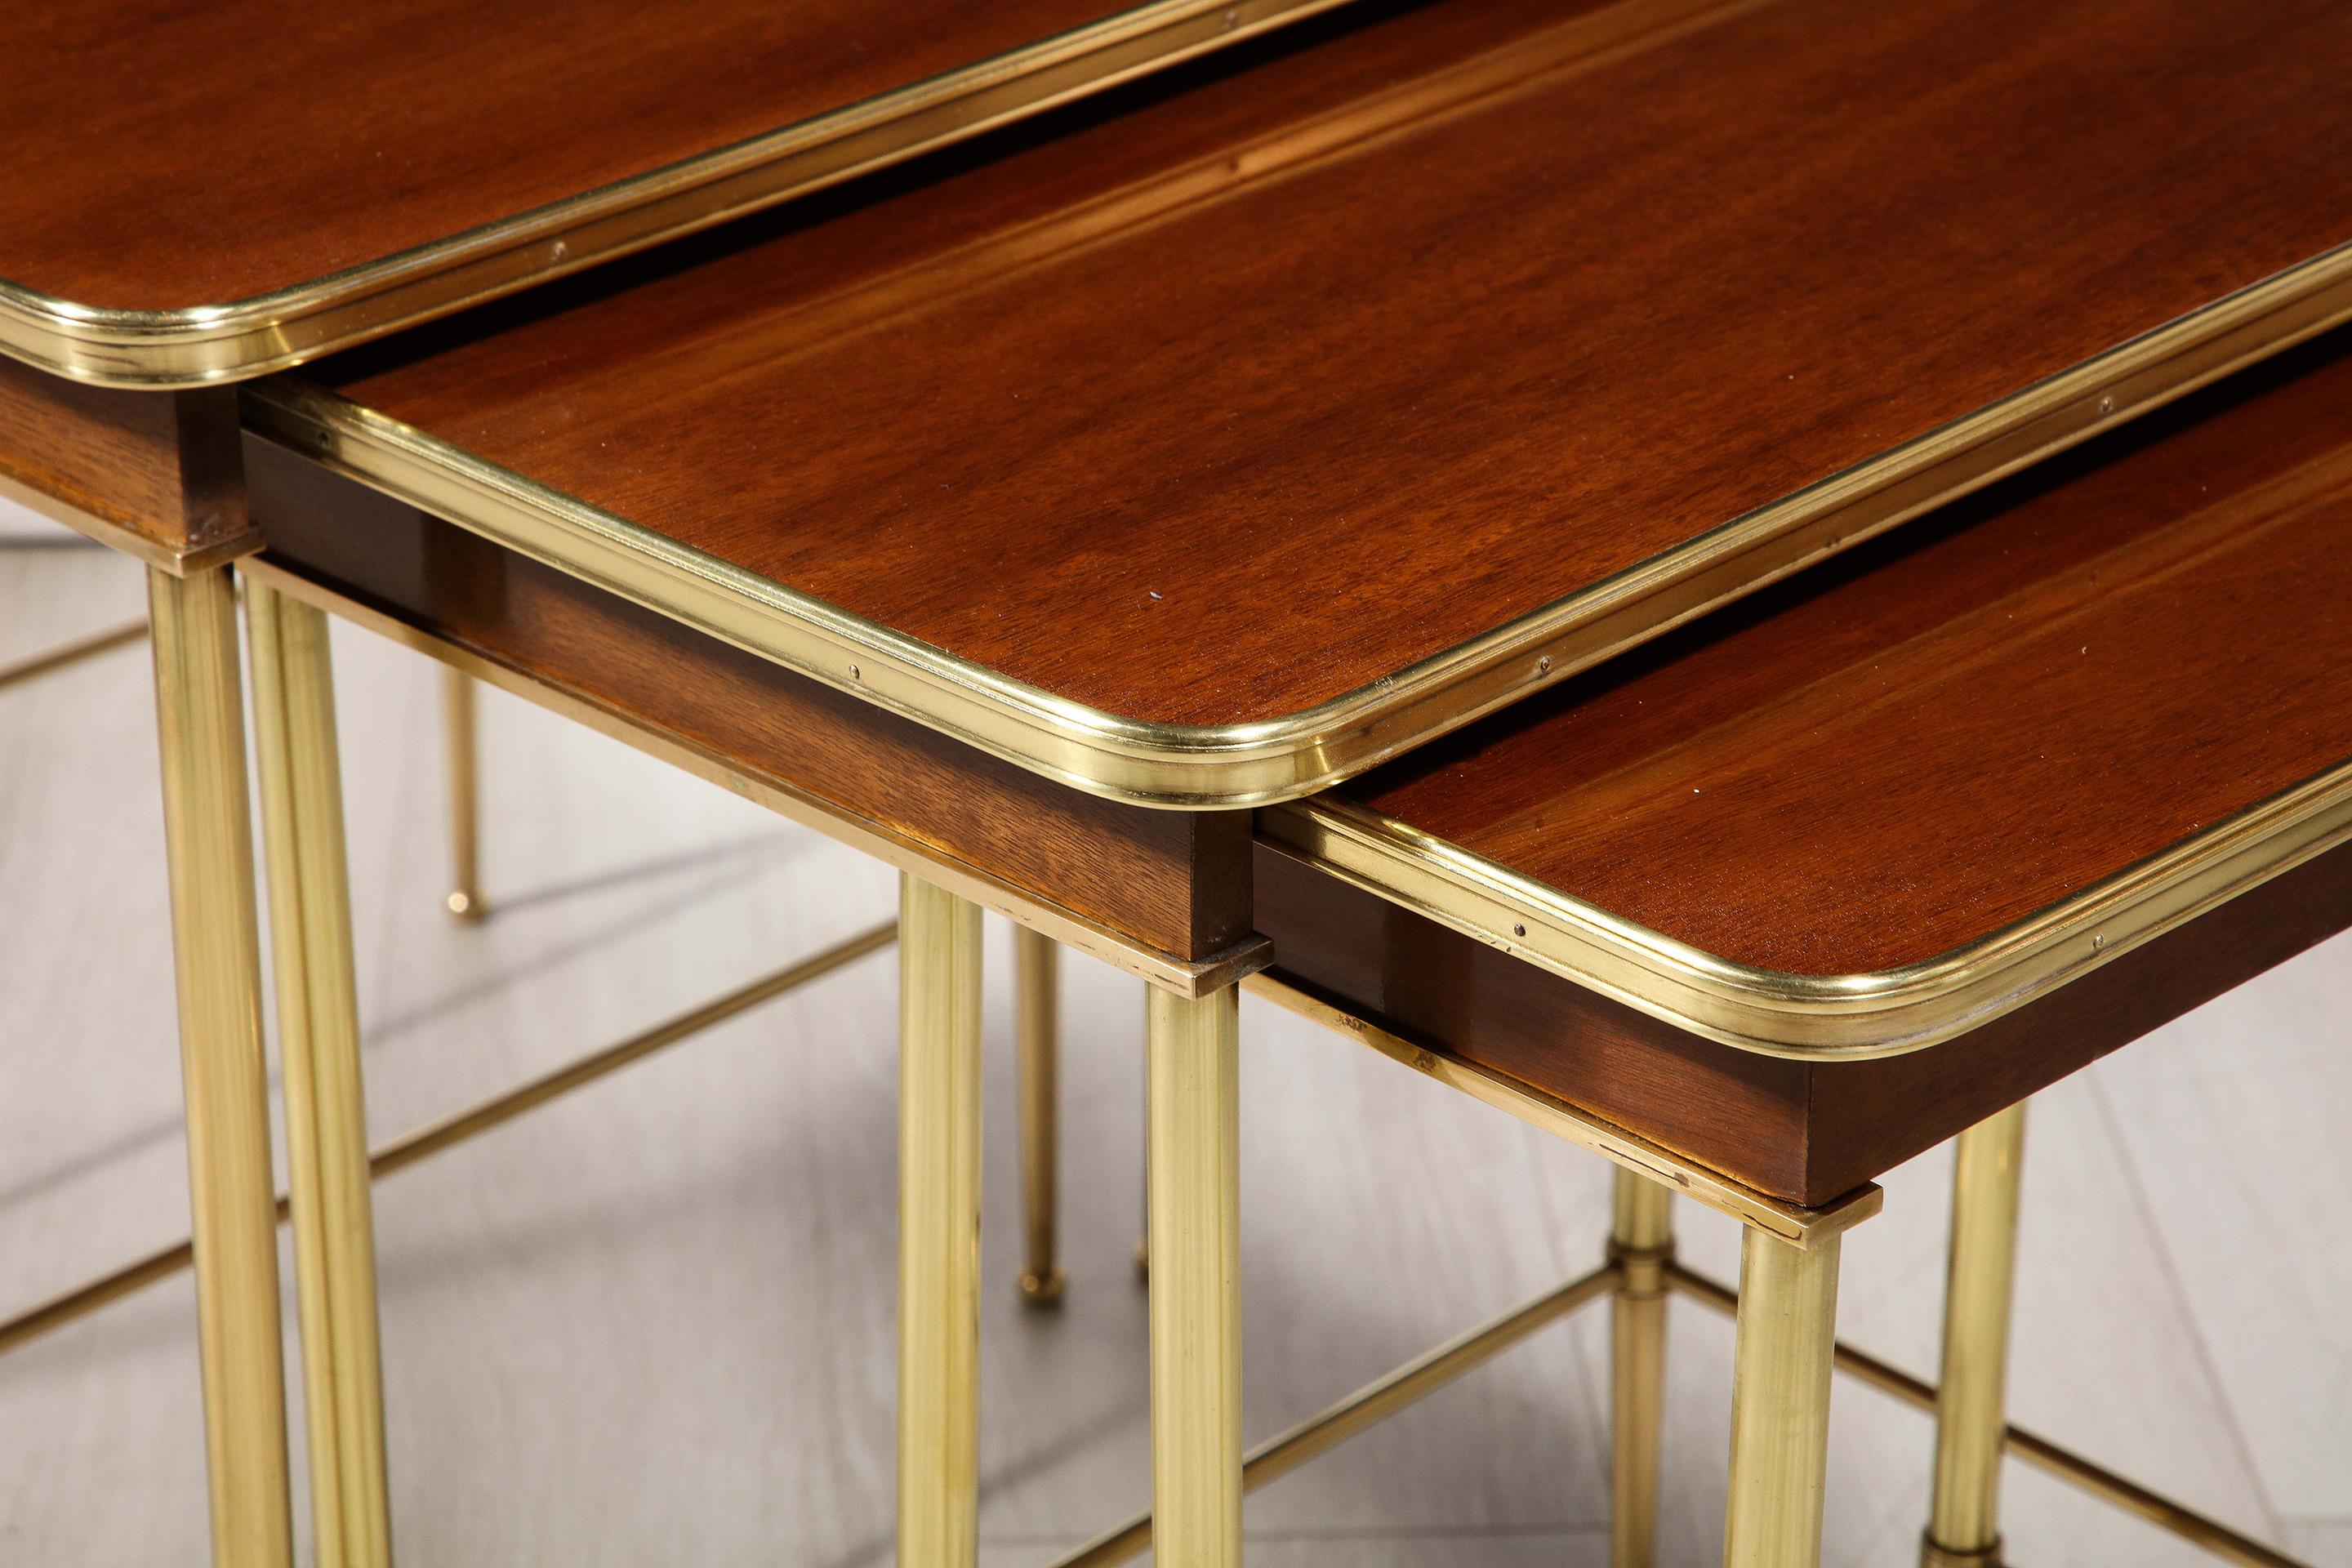 Set of 4 Mahogany and Brass Nesting Tables by Maison Jansen For Sale 7